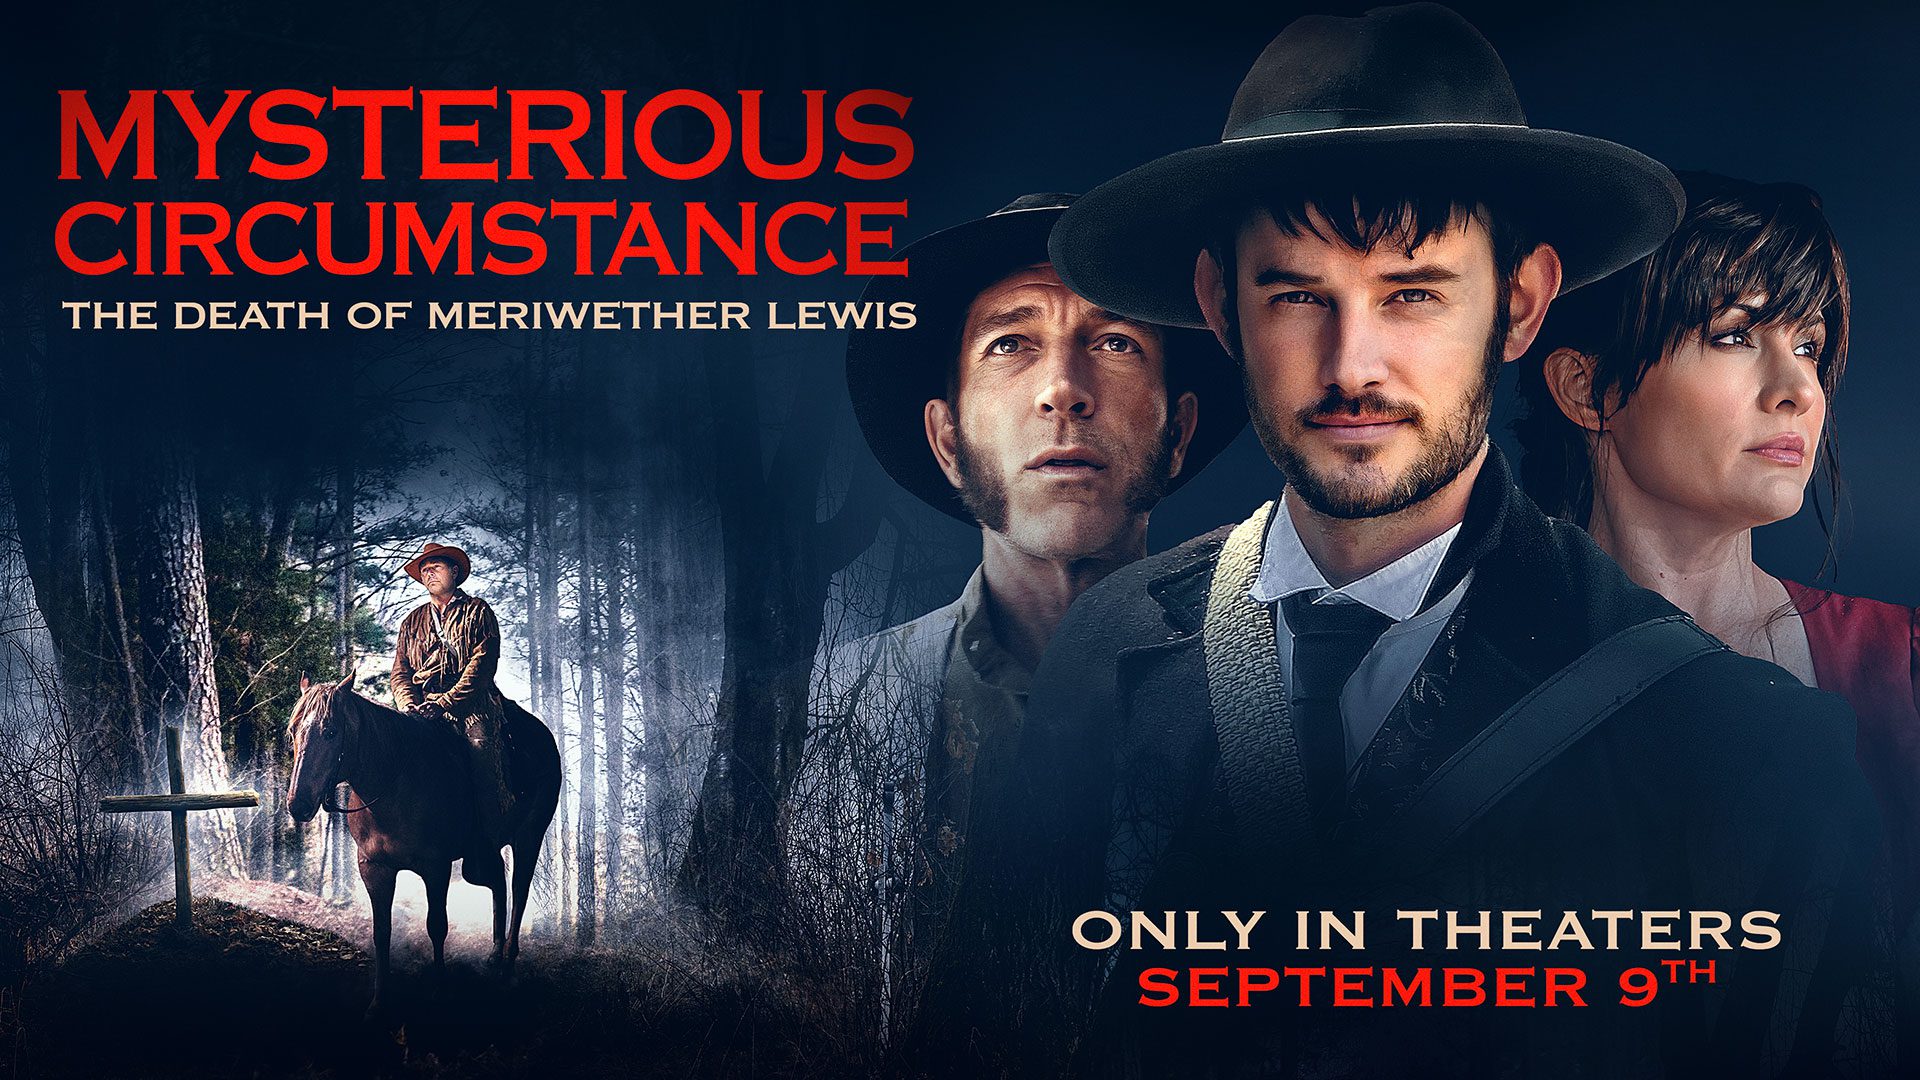 The Franklin Theatre to Host Regional Premiere of ‘Mysterious Circumstance: The Death of Meriwether Lewis’ Starring John Schneider and Evan Williams.